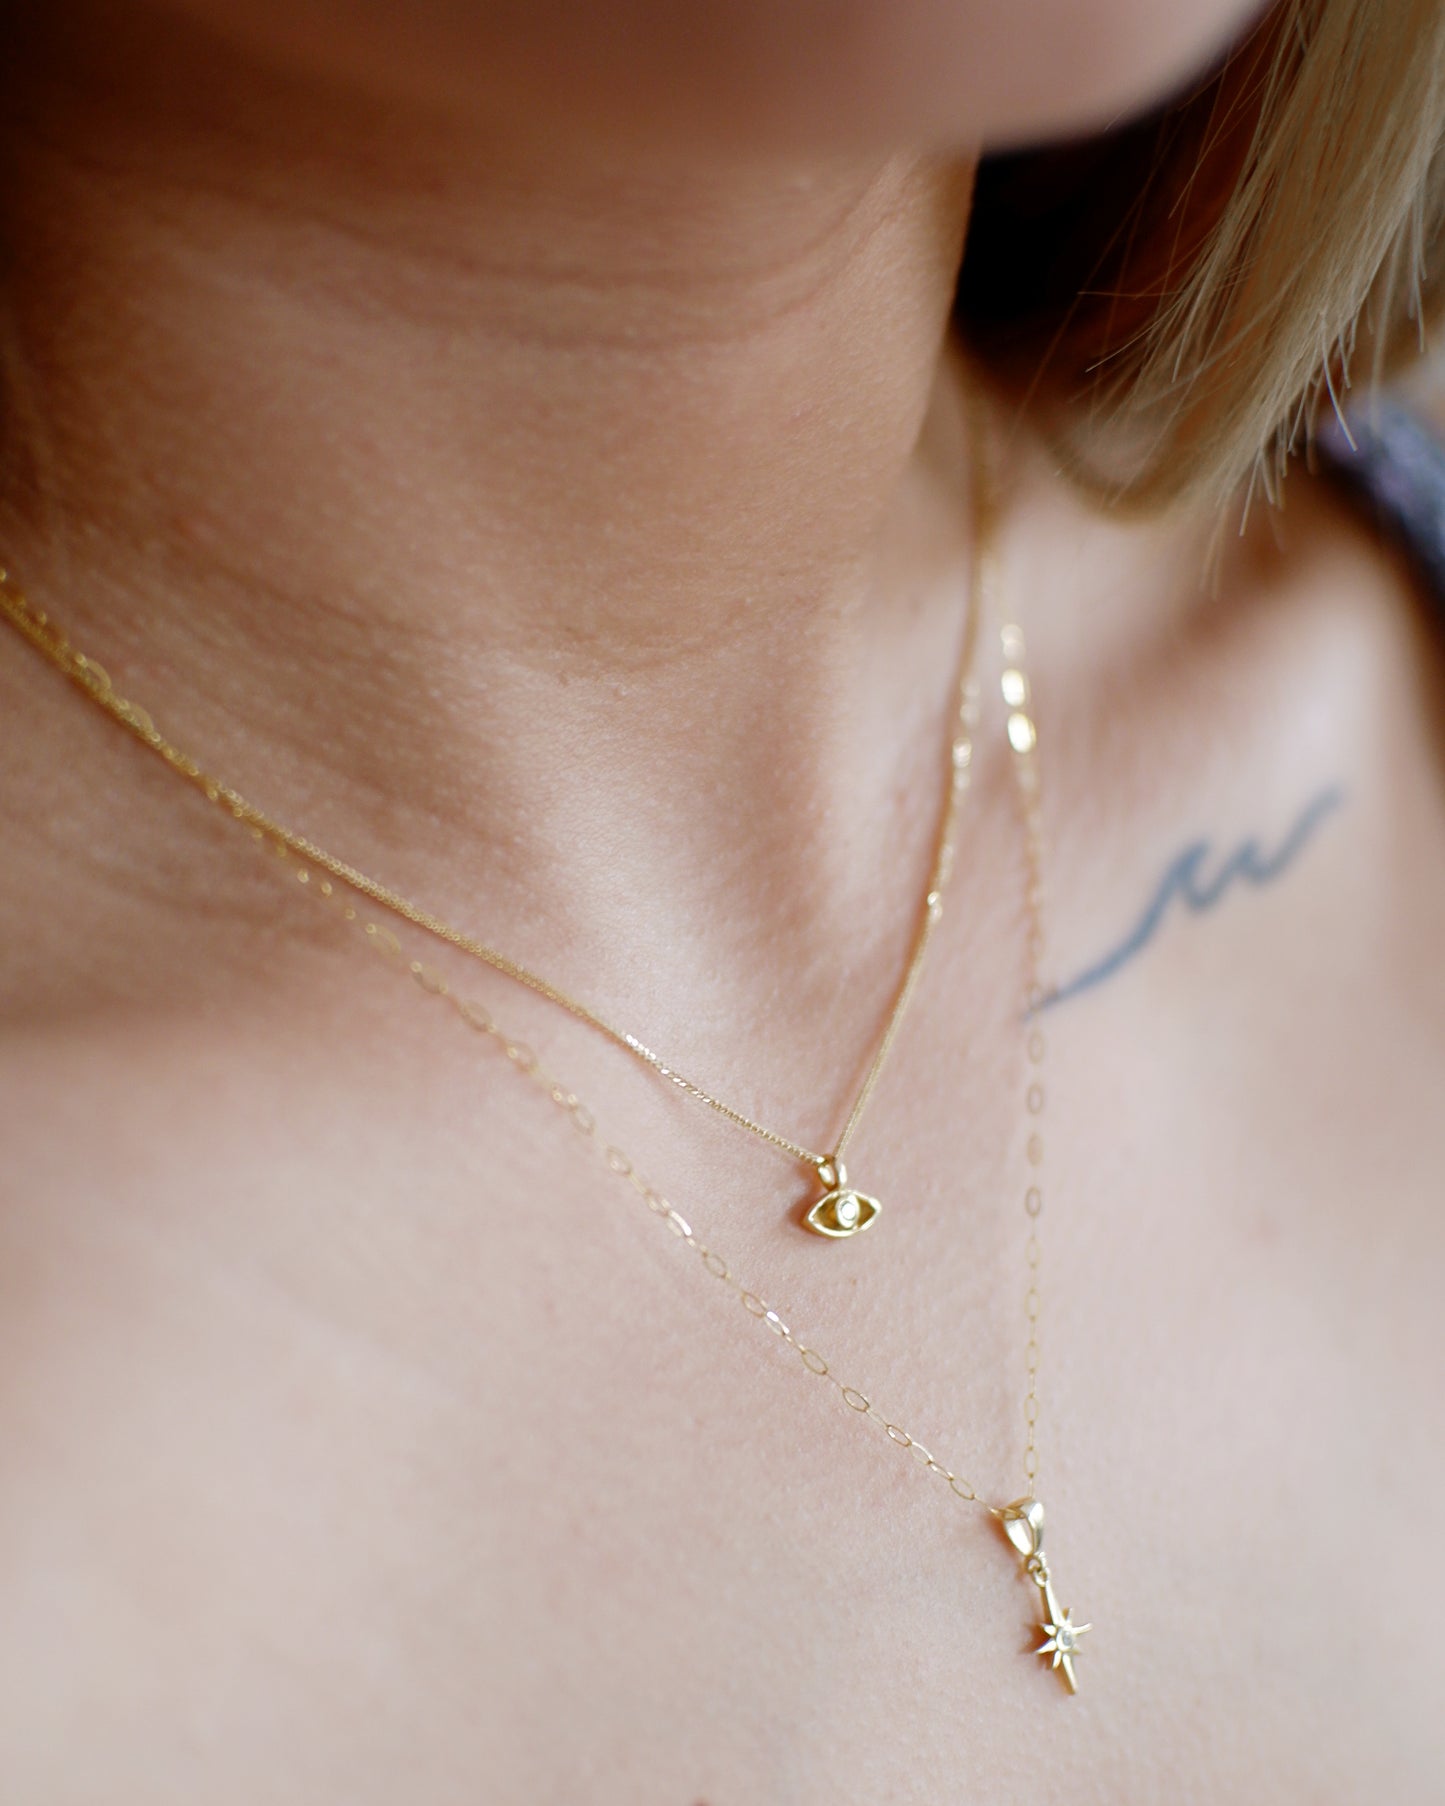 The Starlight Pendant in Solid Gold